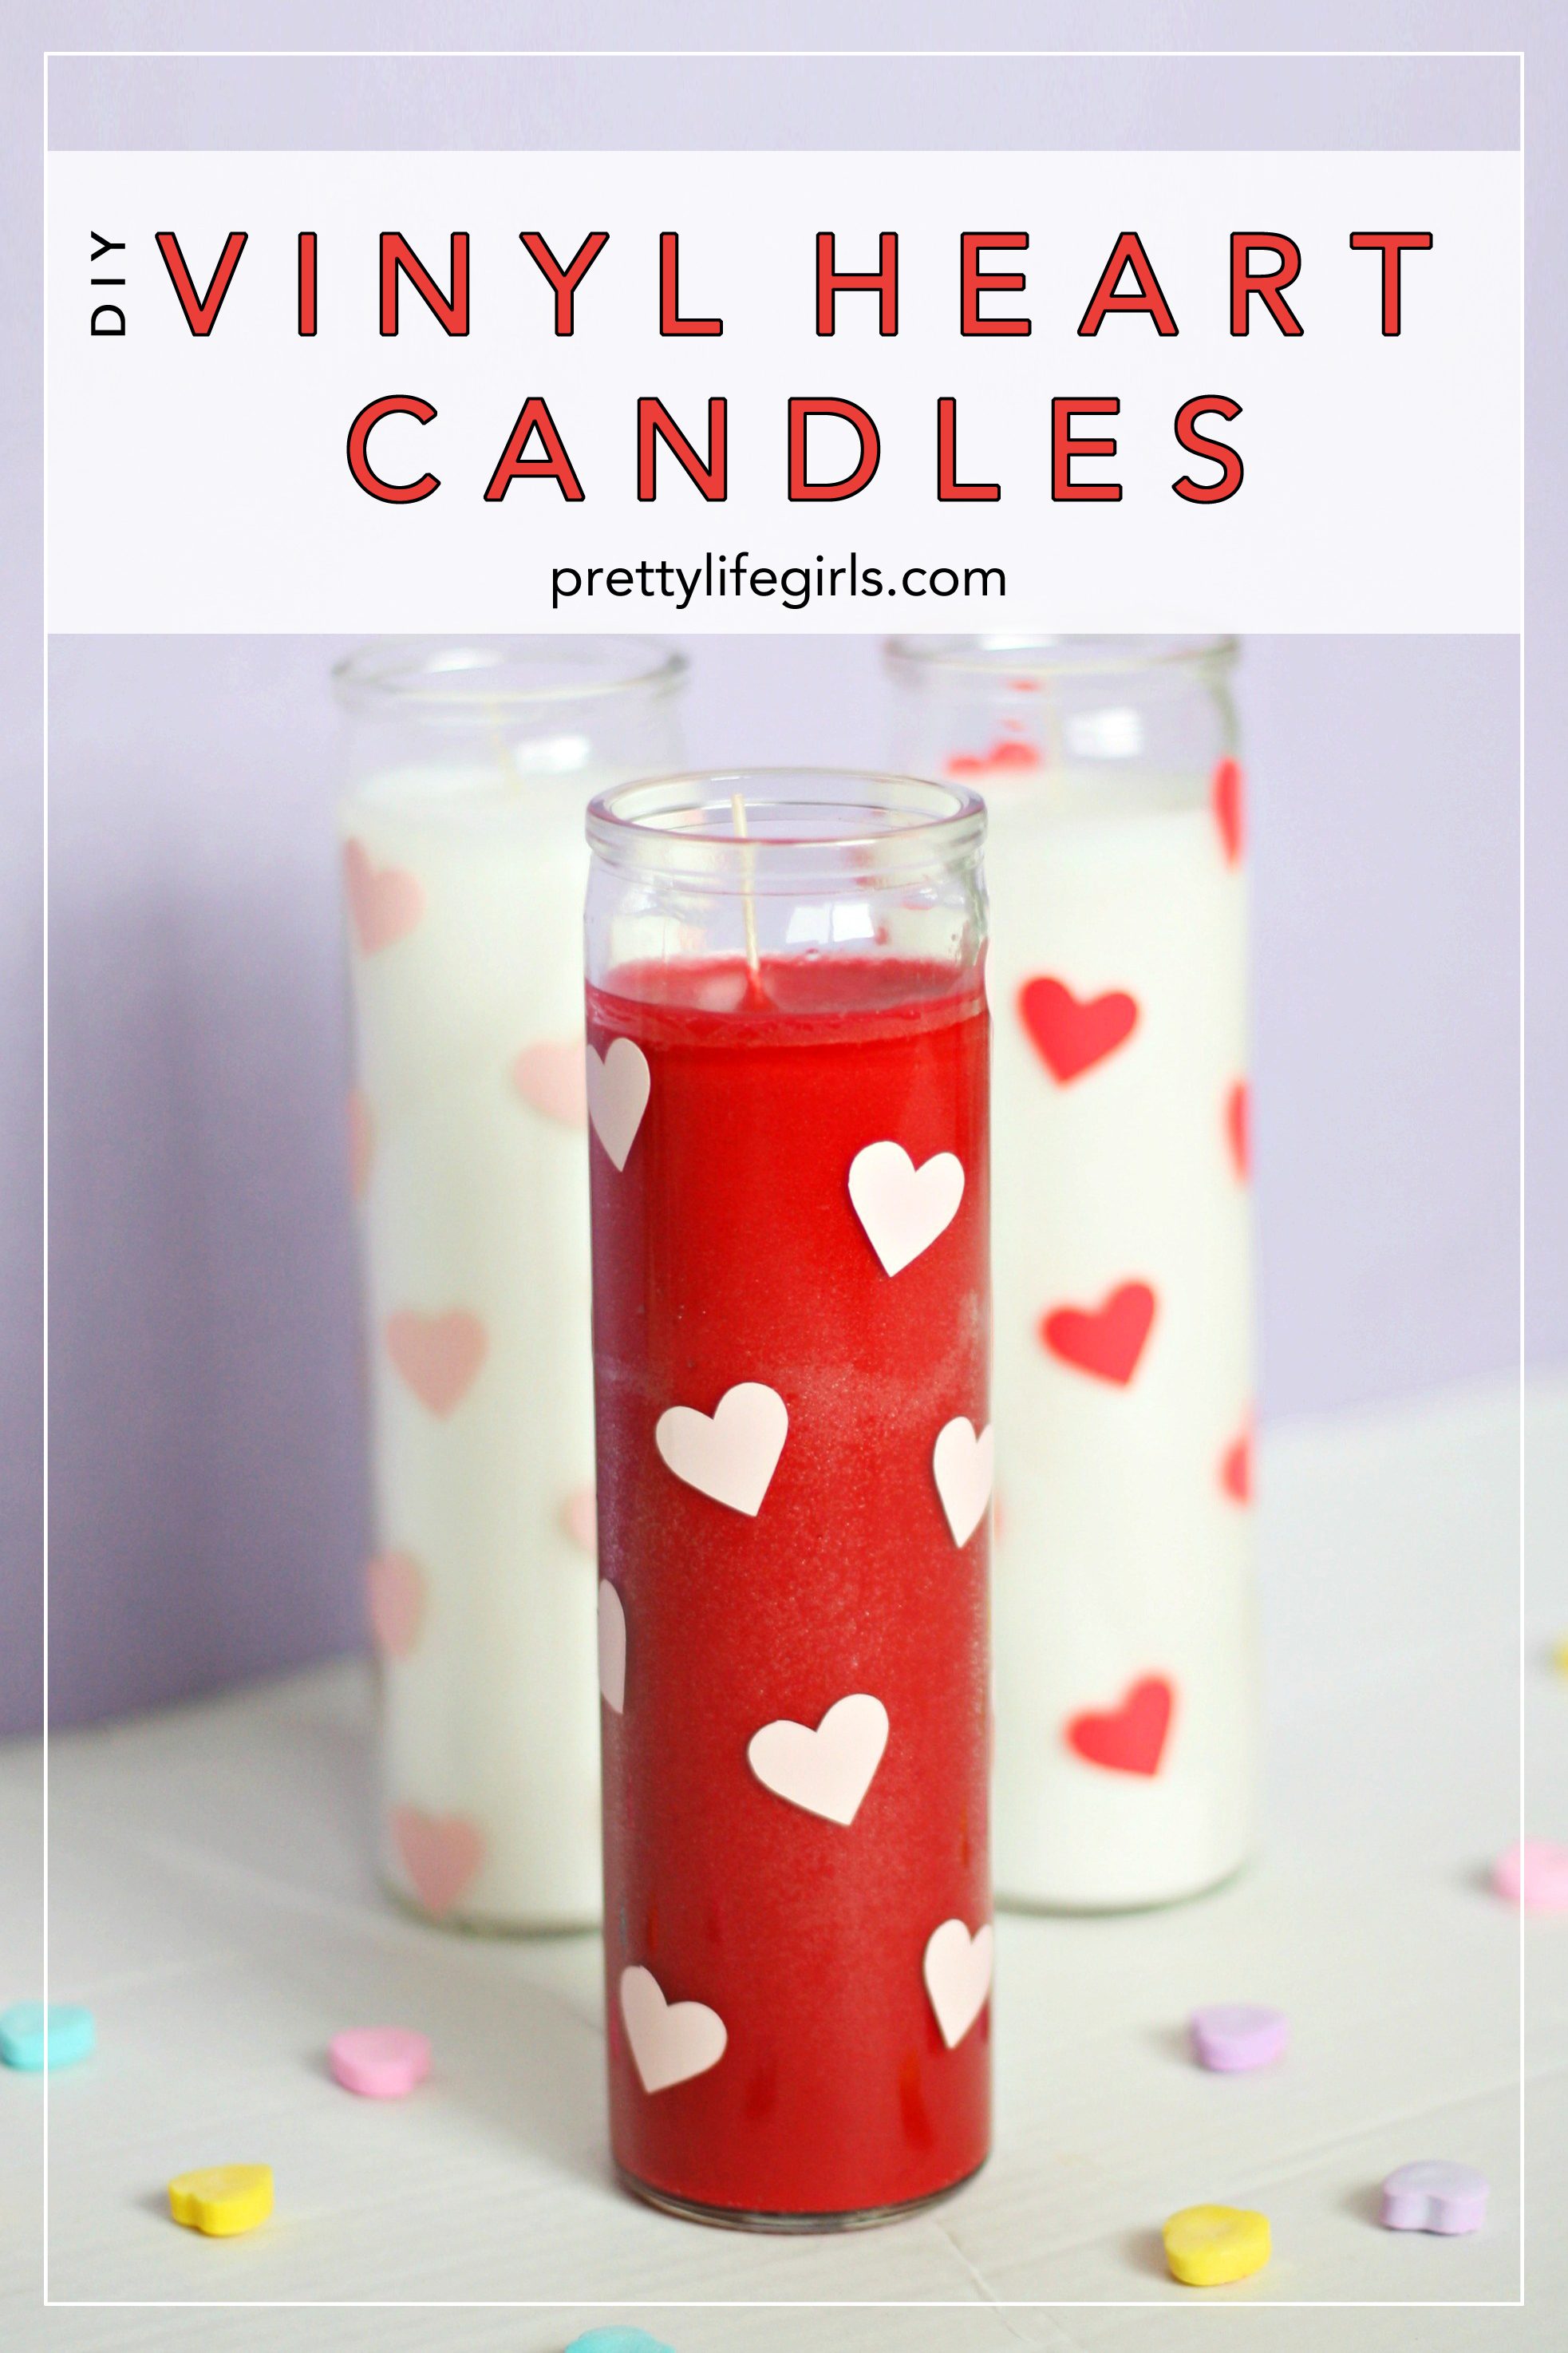 15 Lovely Handmade Valentine Gifts + featured by Top US Craft Blog + The Pretty Life Girls: + DIY Vinyl Heart Candles